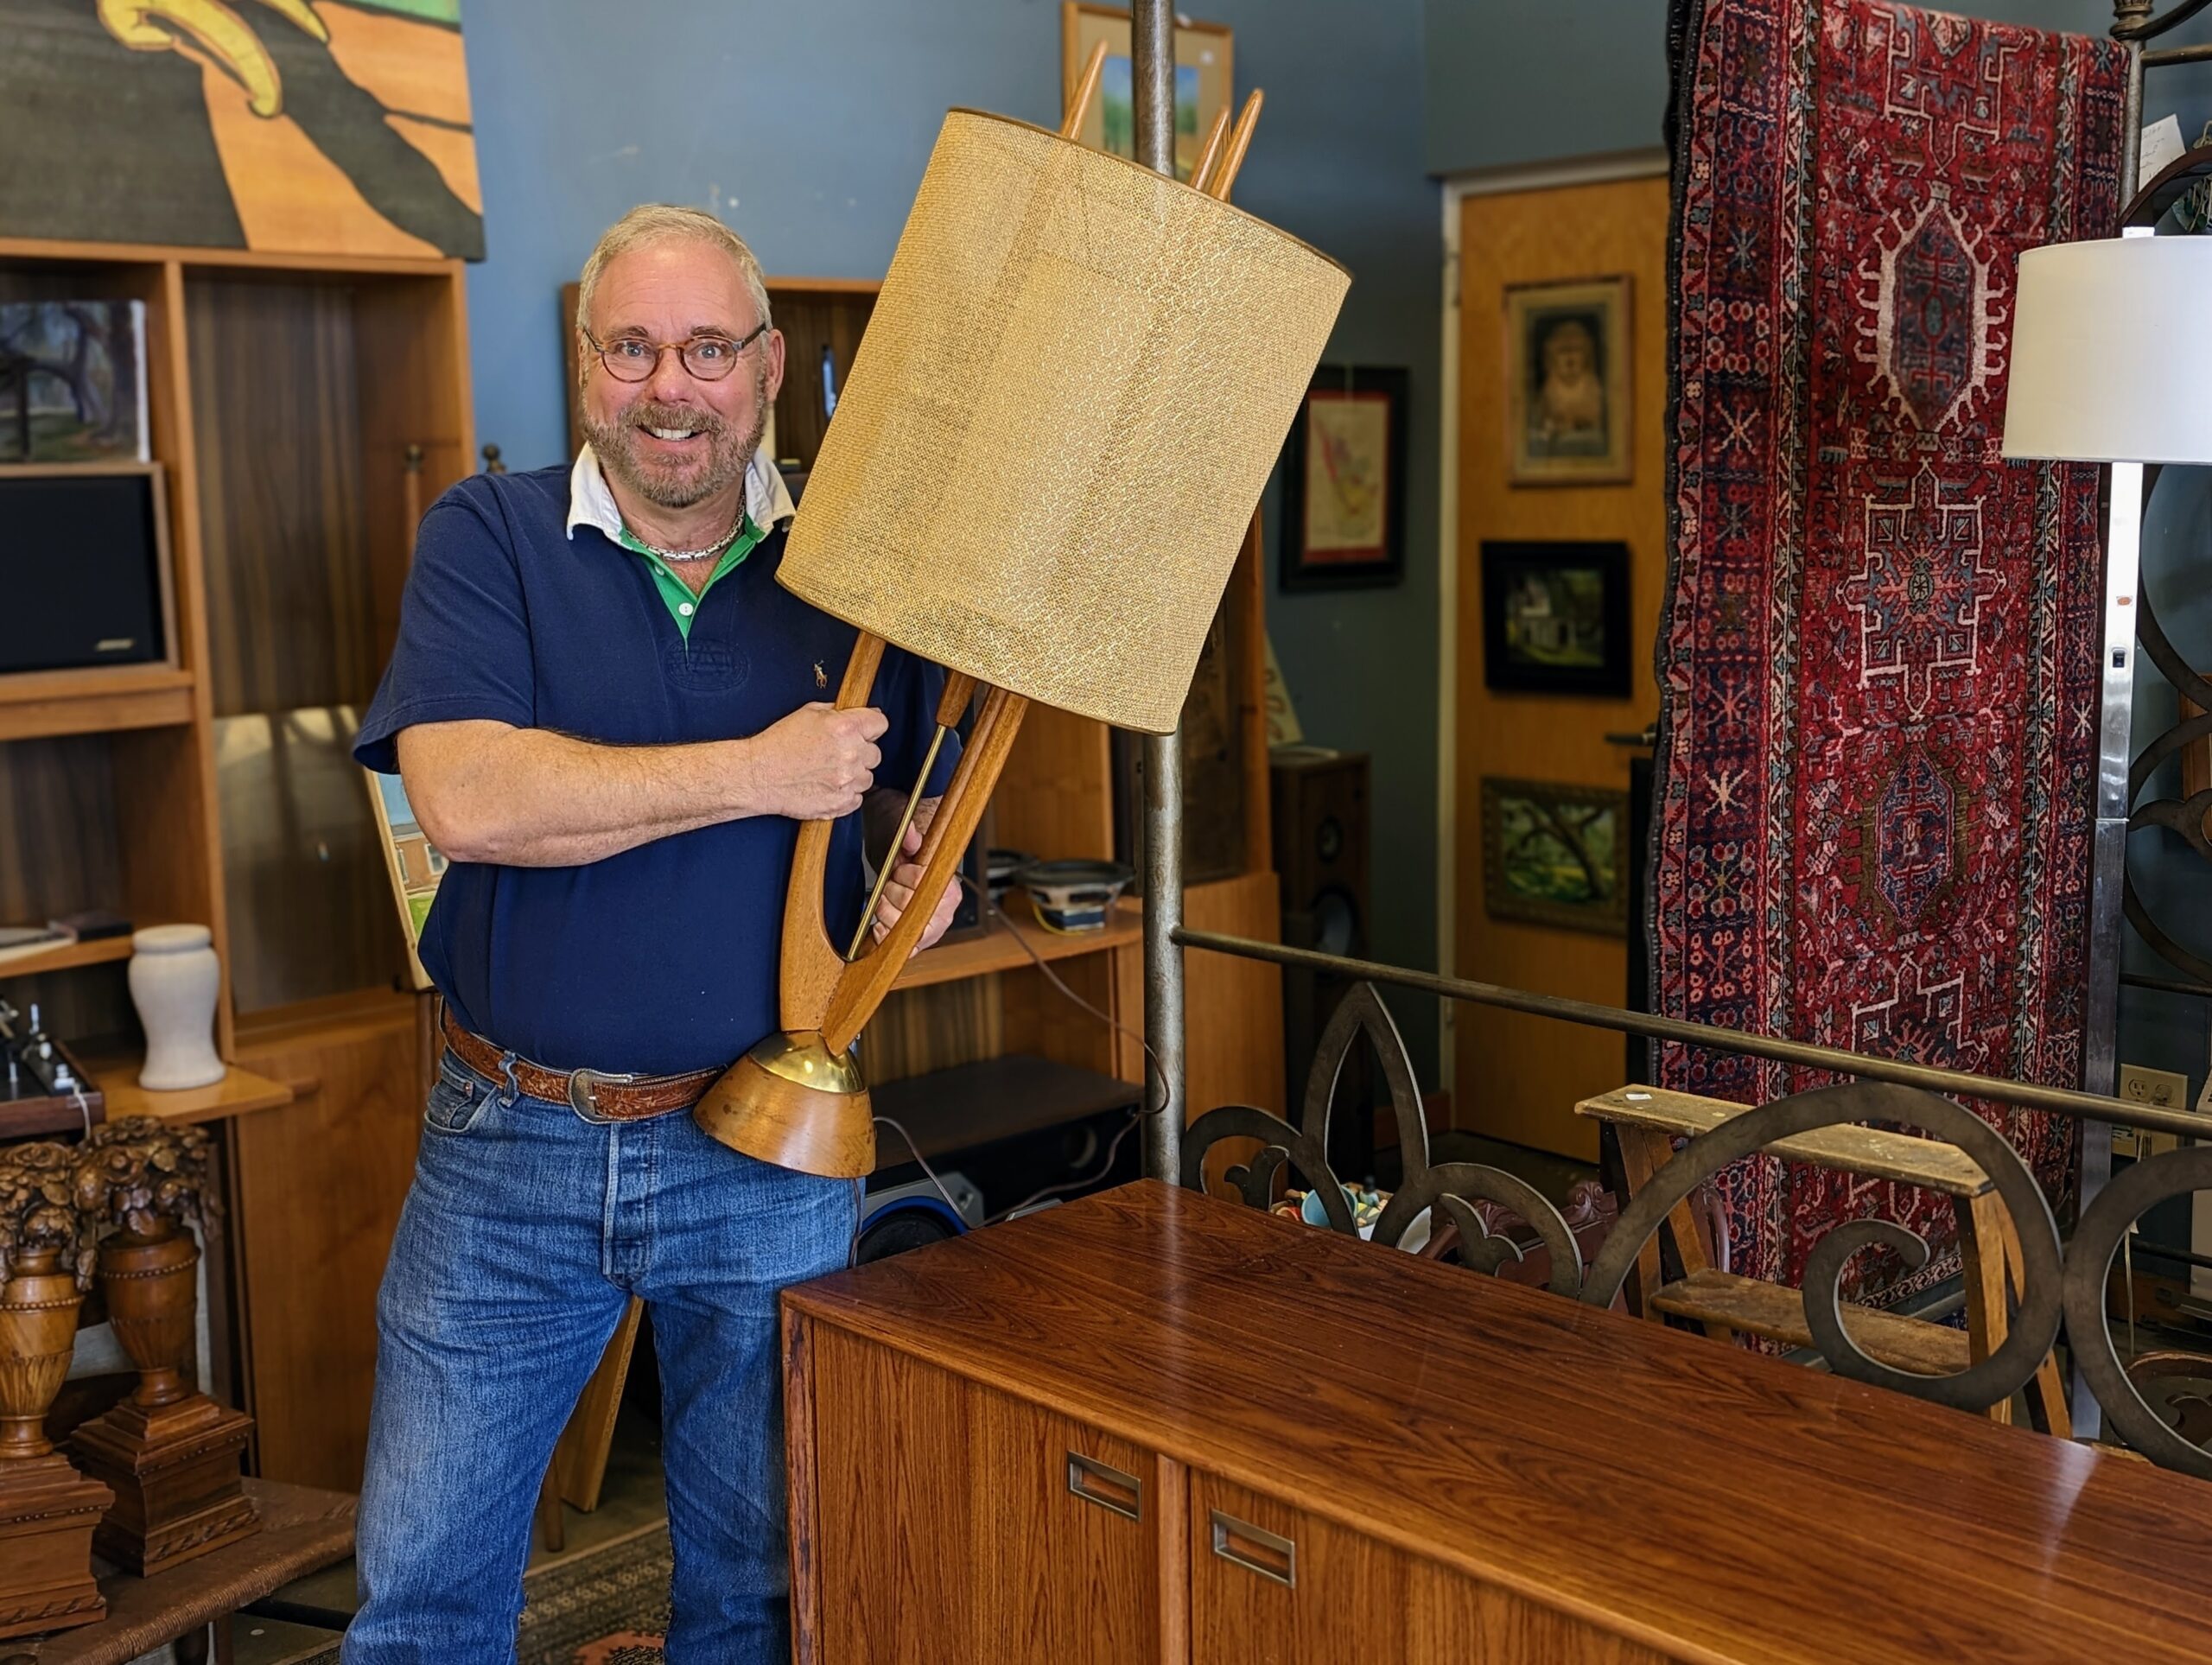 Jeff Scofield, owner of Jeff's Warehouse, holding a Mid-Century modern lamp.